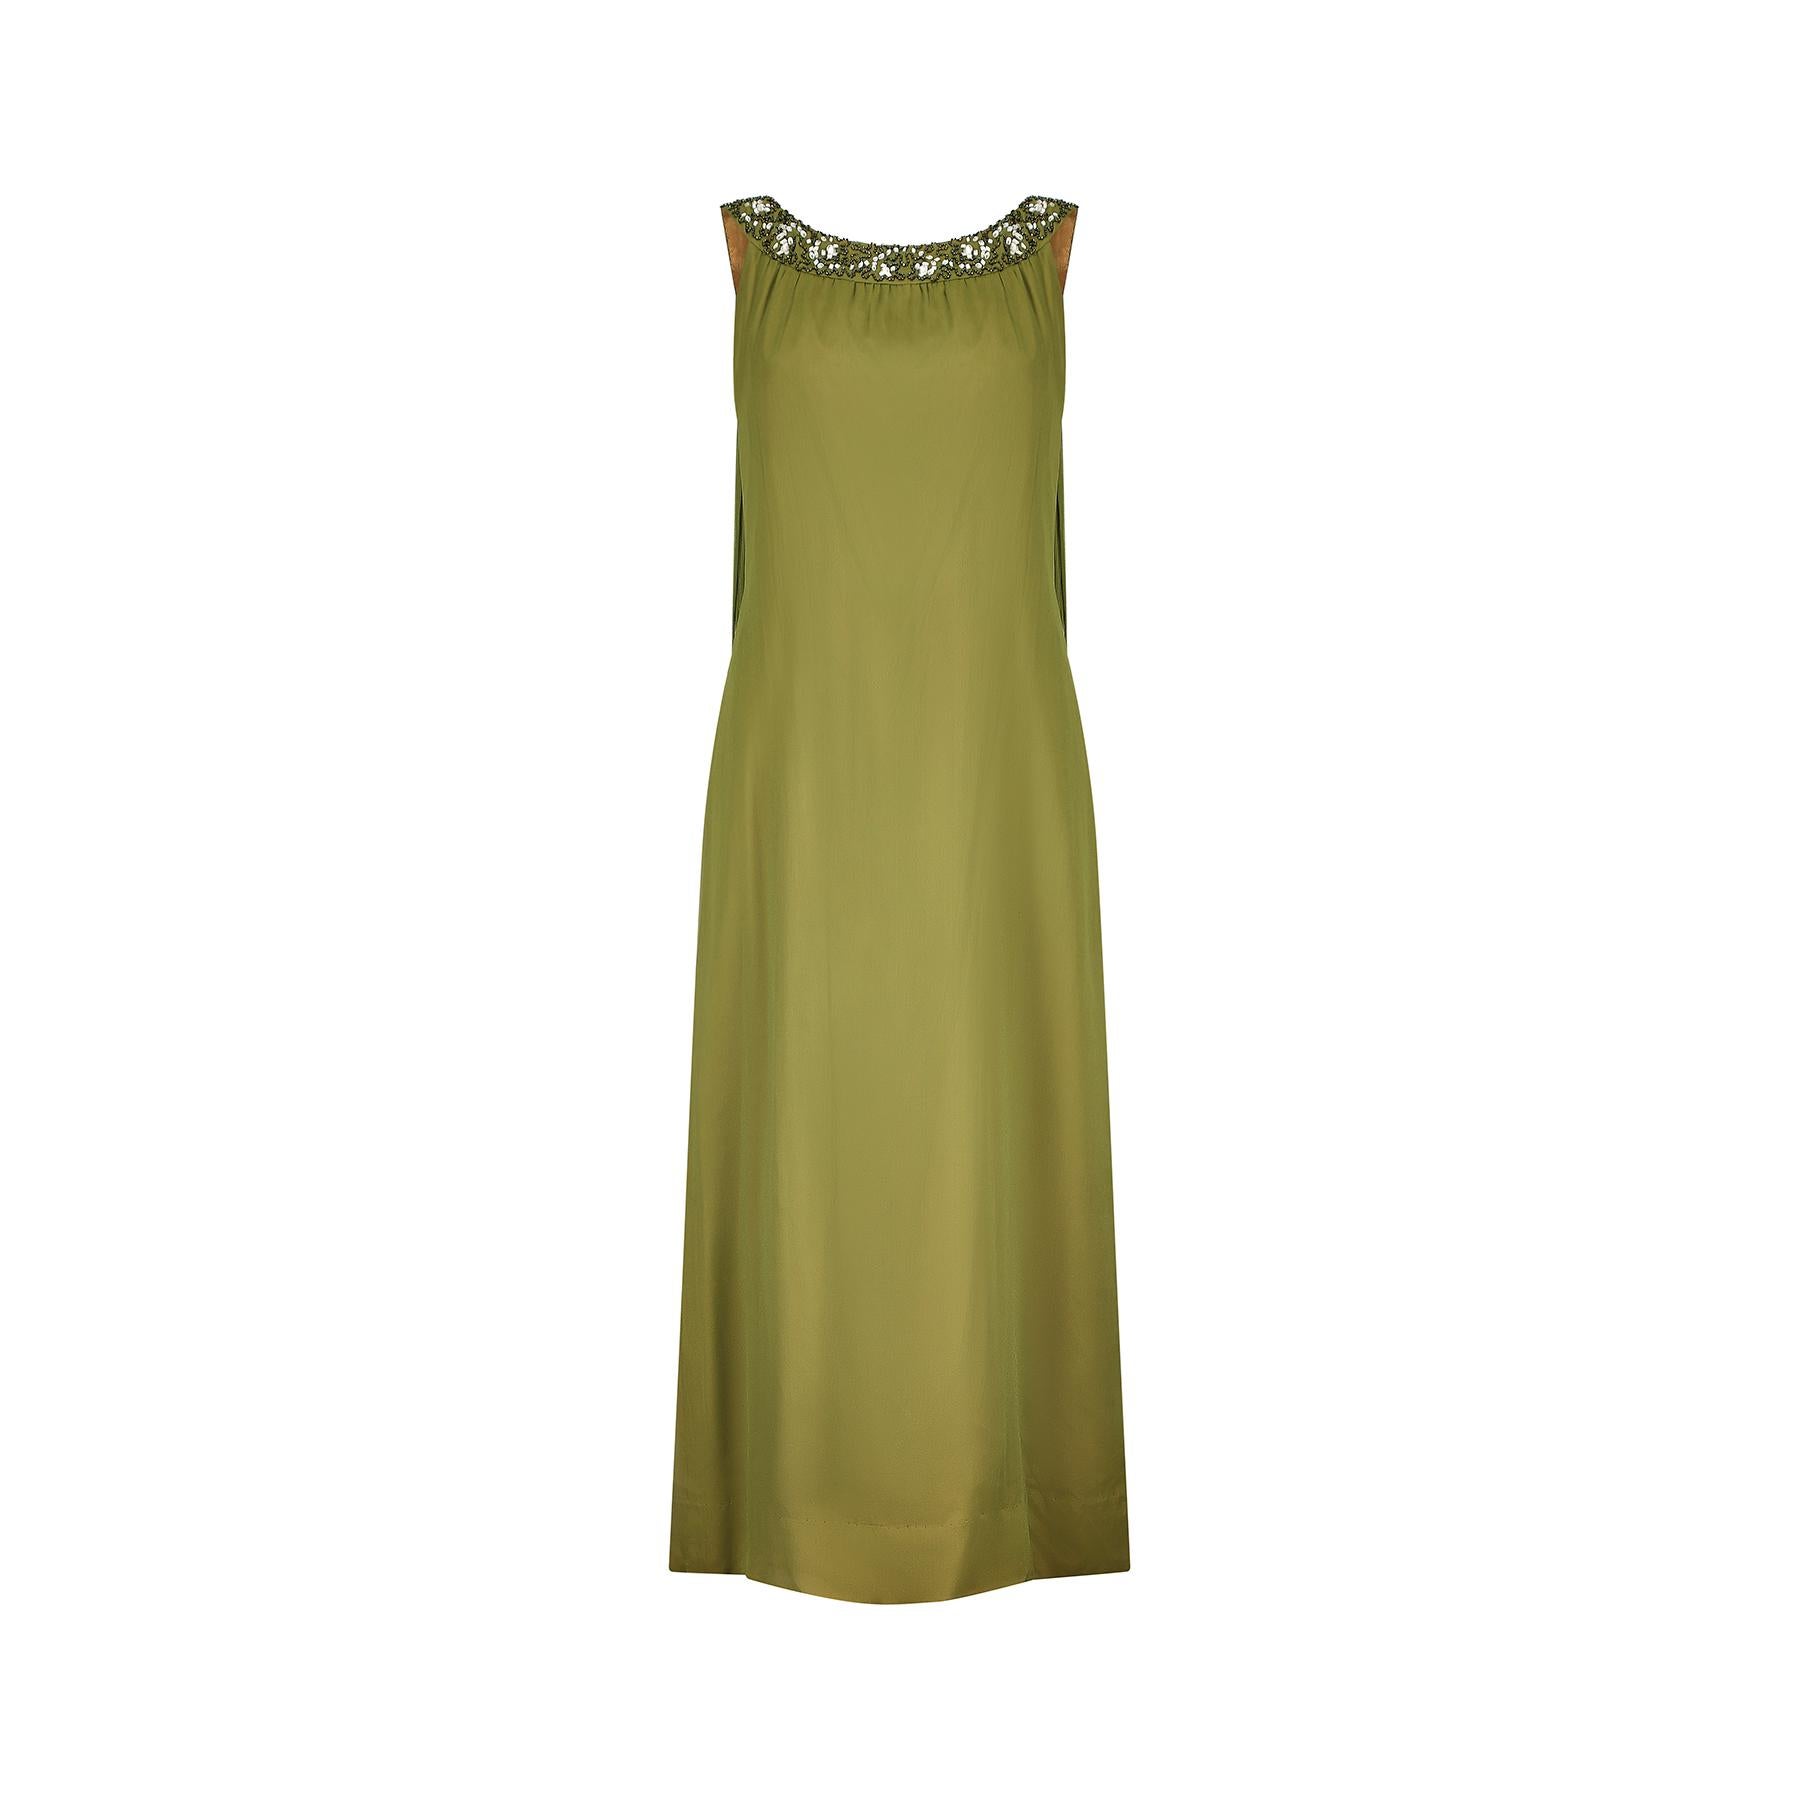 Brown 1960s California Olive Green Chiffon Beaded Dress with Train For Sale